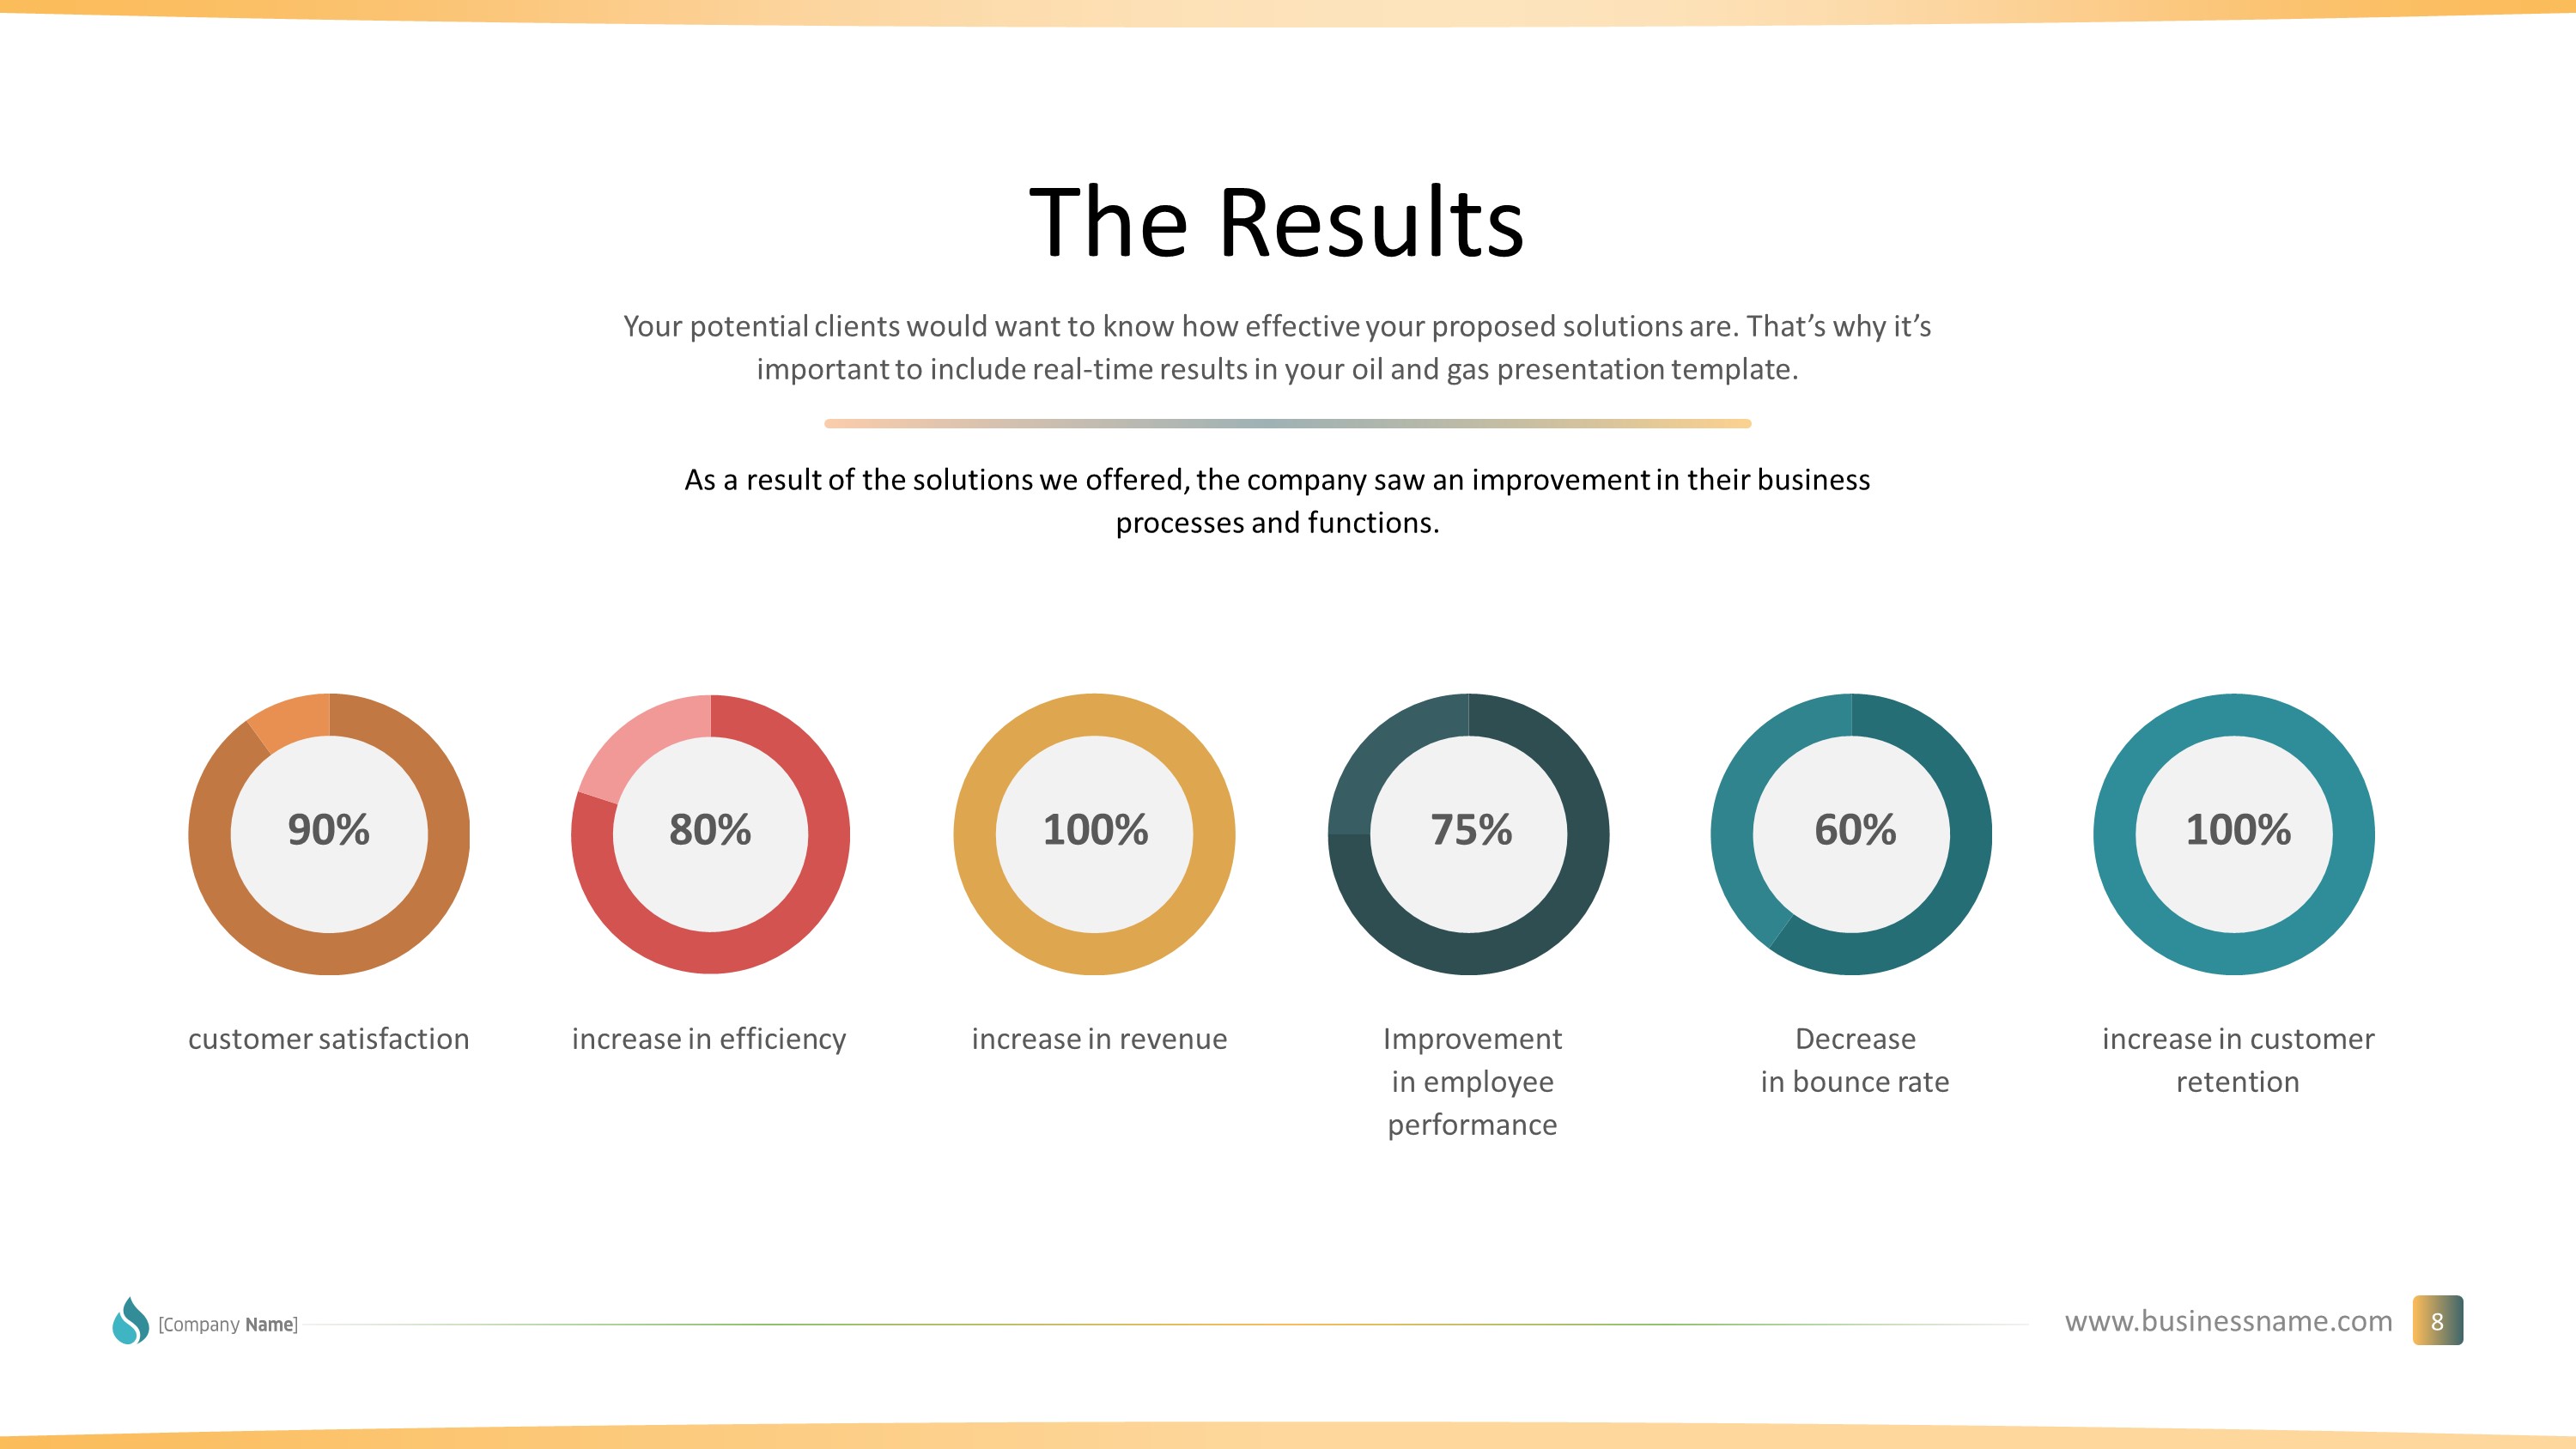 26731_Renewable_Energy_Premium_PowerPoint_Template_Slide_8_The_Results